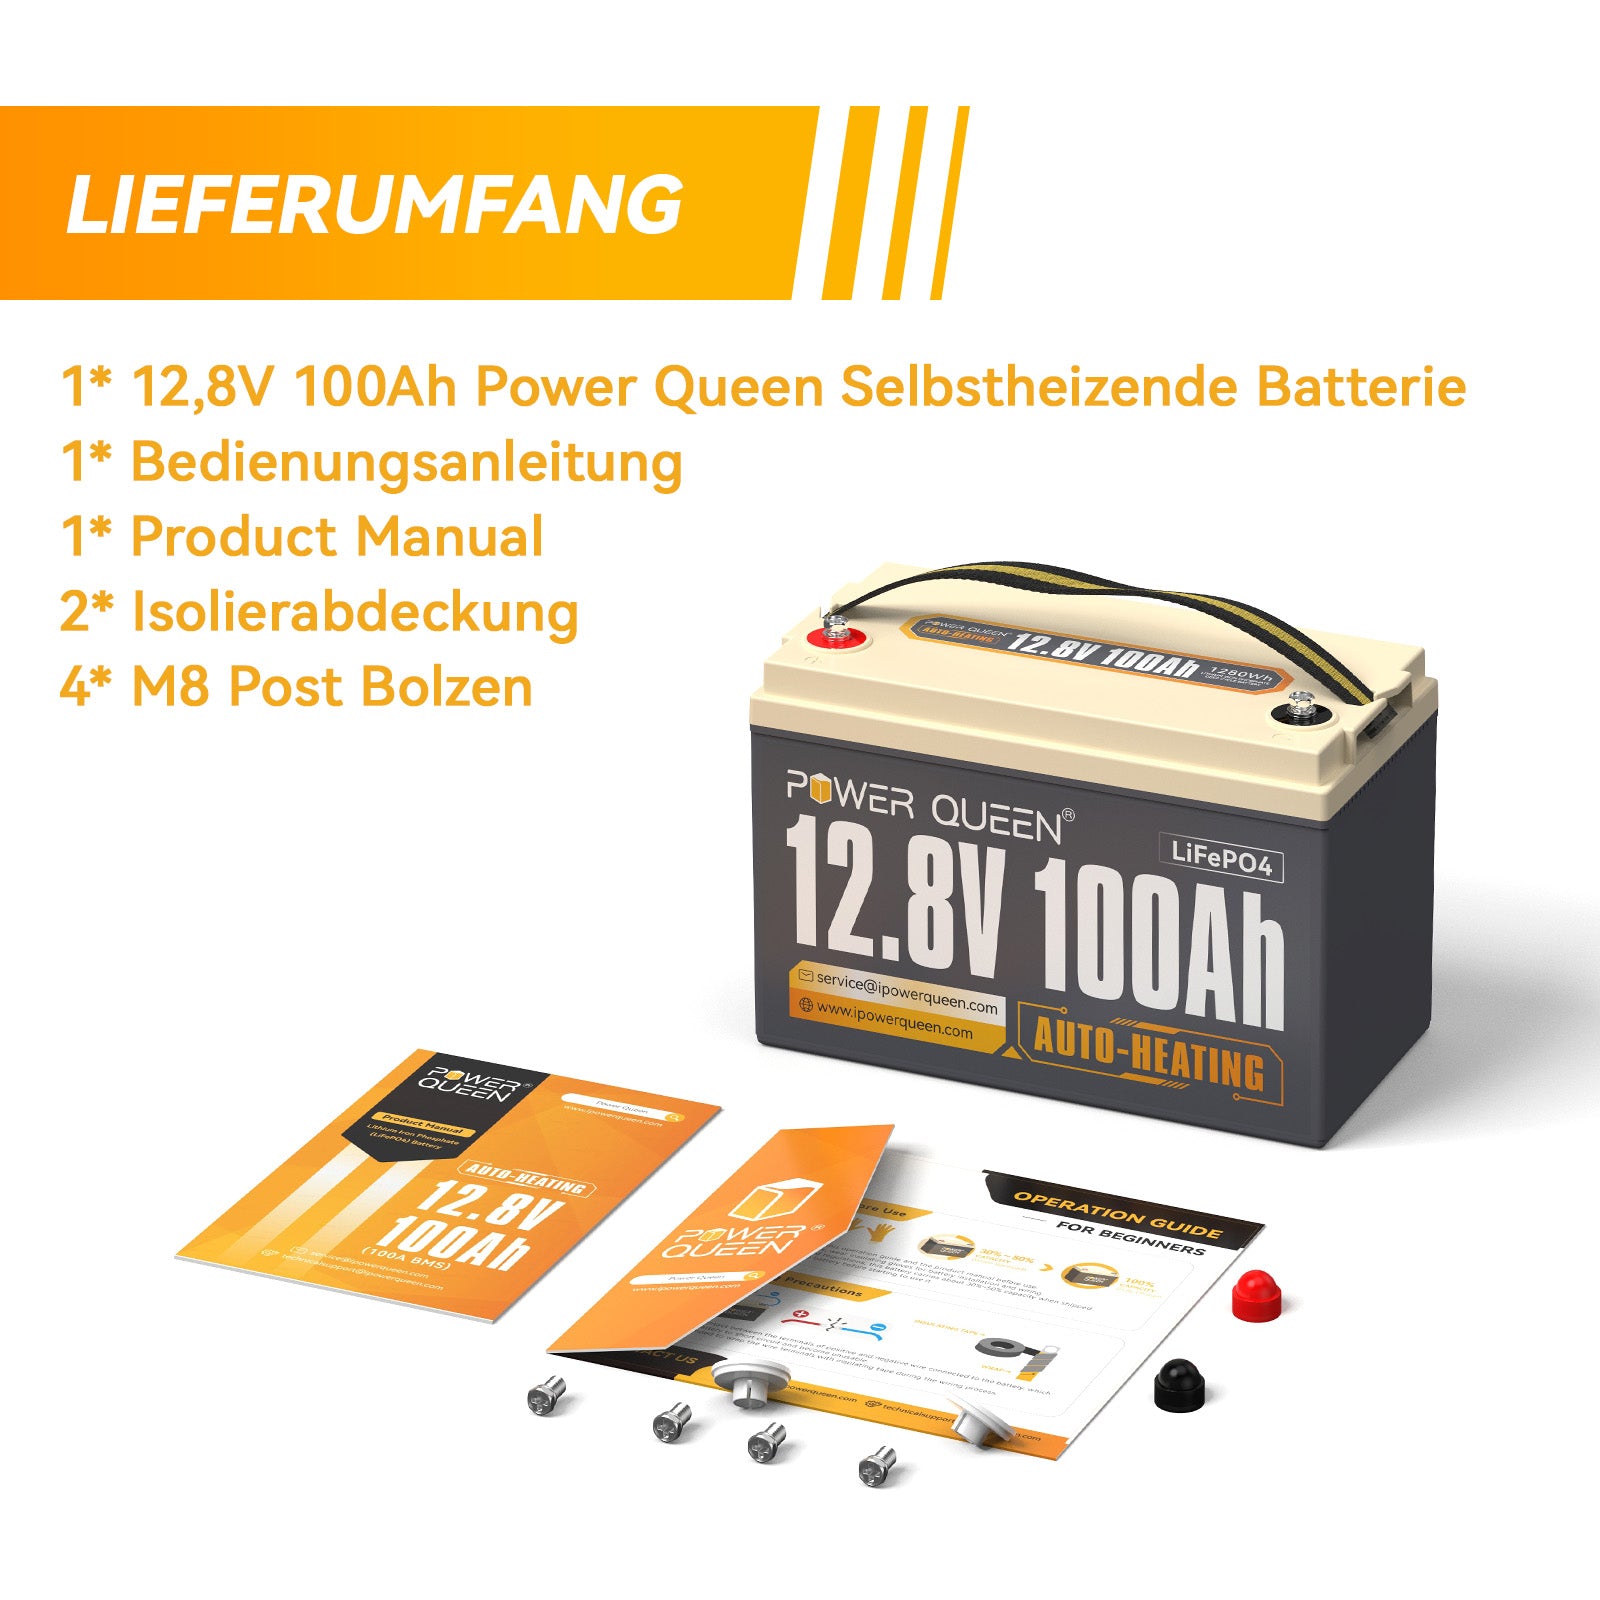 Power Queen 12.8V 100Ah Self-Heating LiFePO4 Battery, Built-in 100A BMS